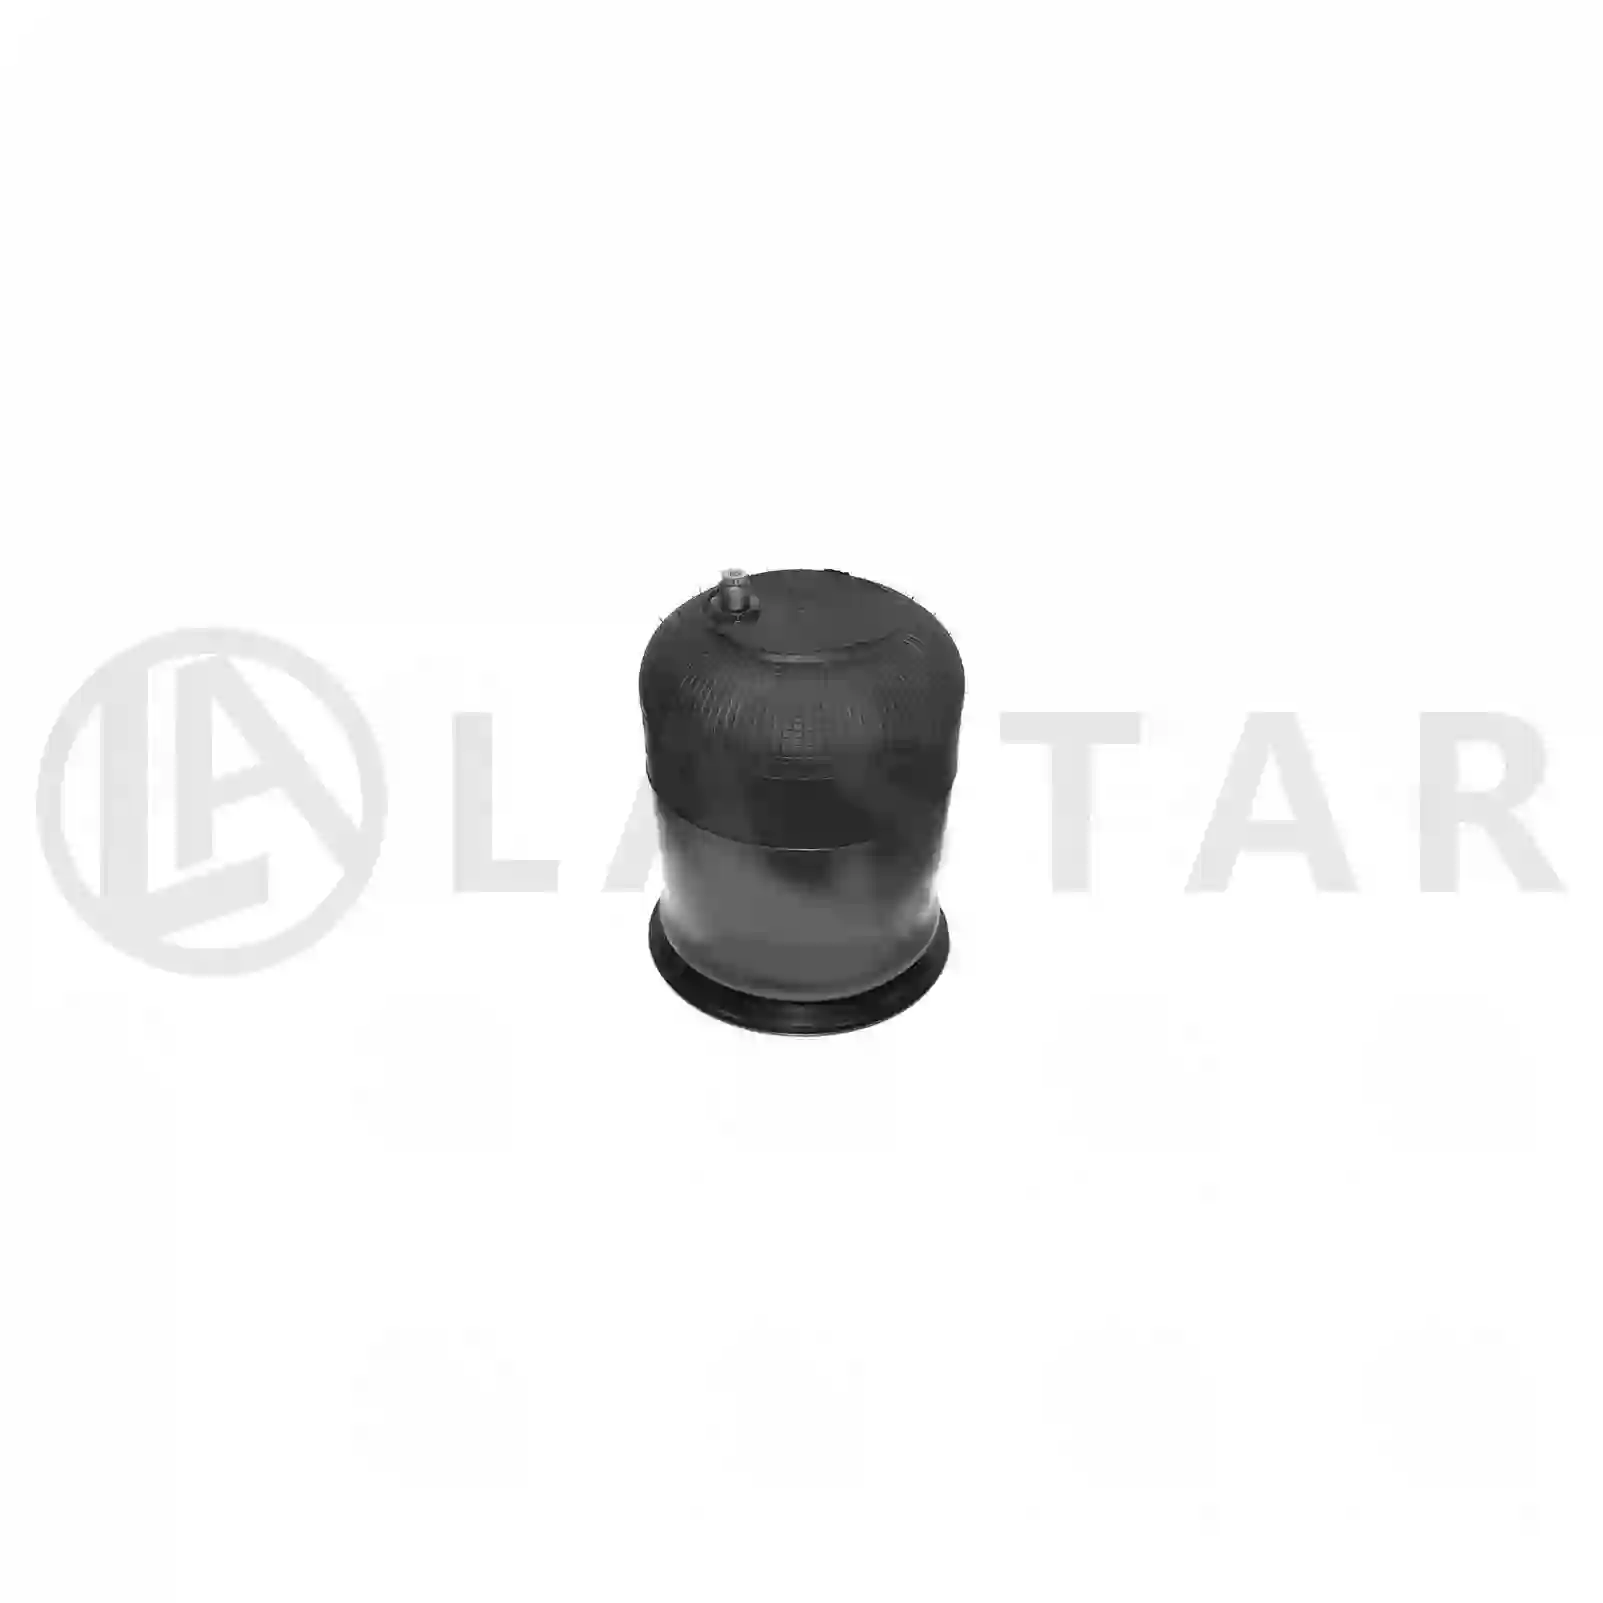 Air spring, with steel piston, 77728195, 9423203221, 9743200217, 9743200417, ZG40774-0008 ||  77728195 Lastar Spare Part | Truck Spare Parts, Auotomotive Spare Parts Air spring, with steel piston, 77728195, 9423203221, 9743200217, 9743200417, ZG40774-0008 ||  77728195 Lastar Spare Part | Truck Spare Parts, Auotomotive Spare Parts